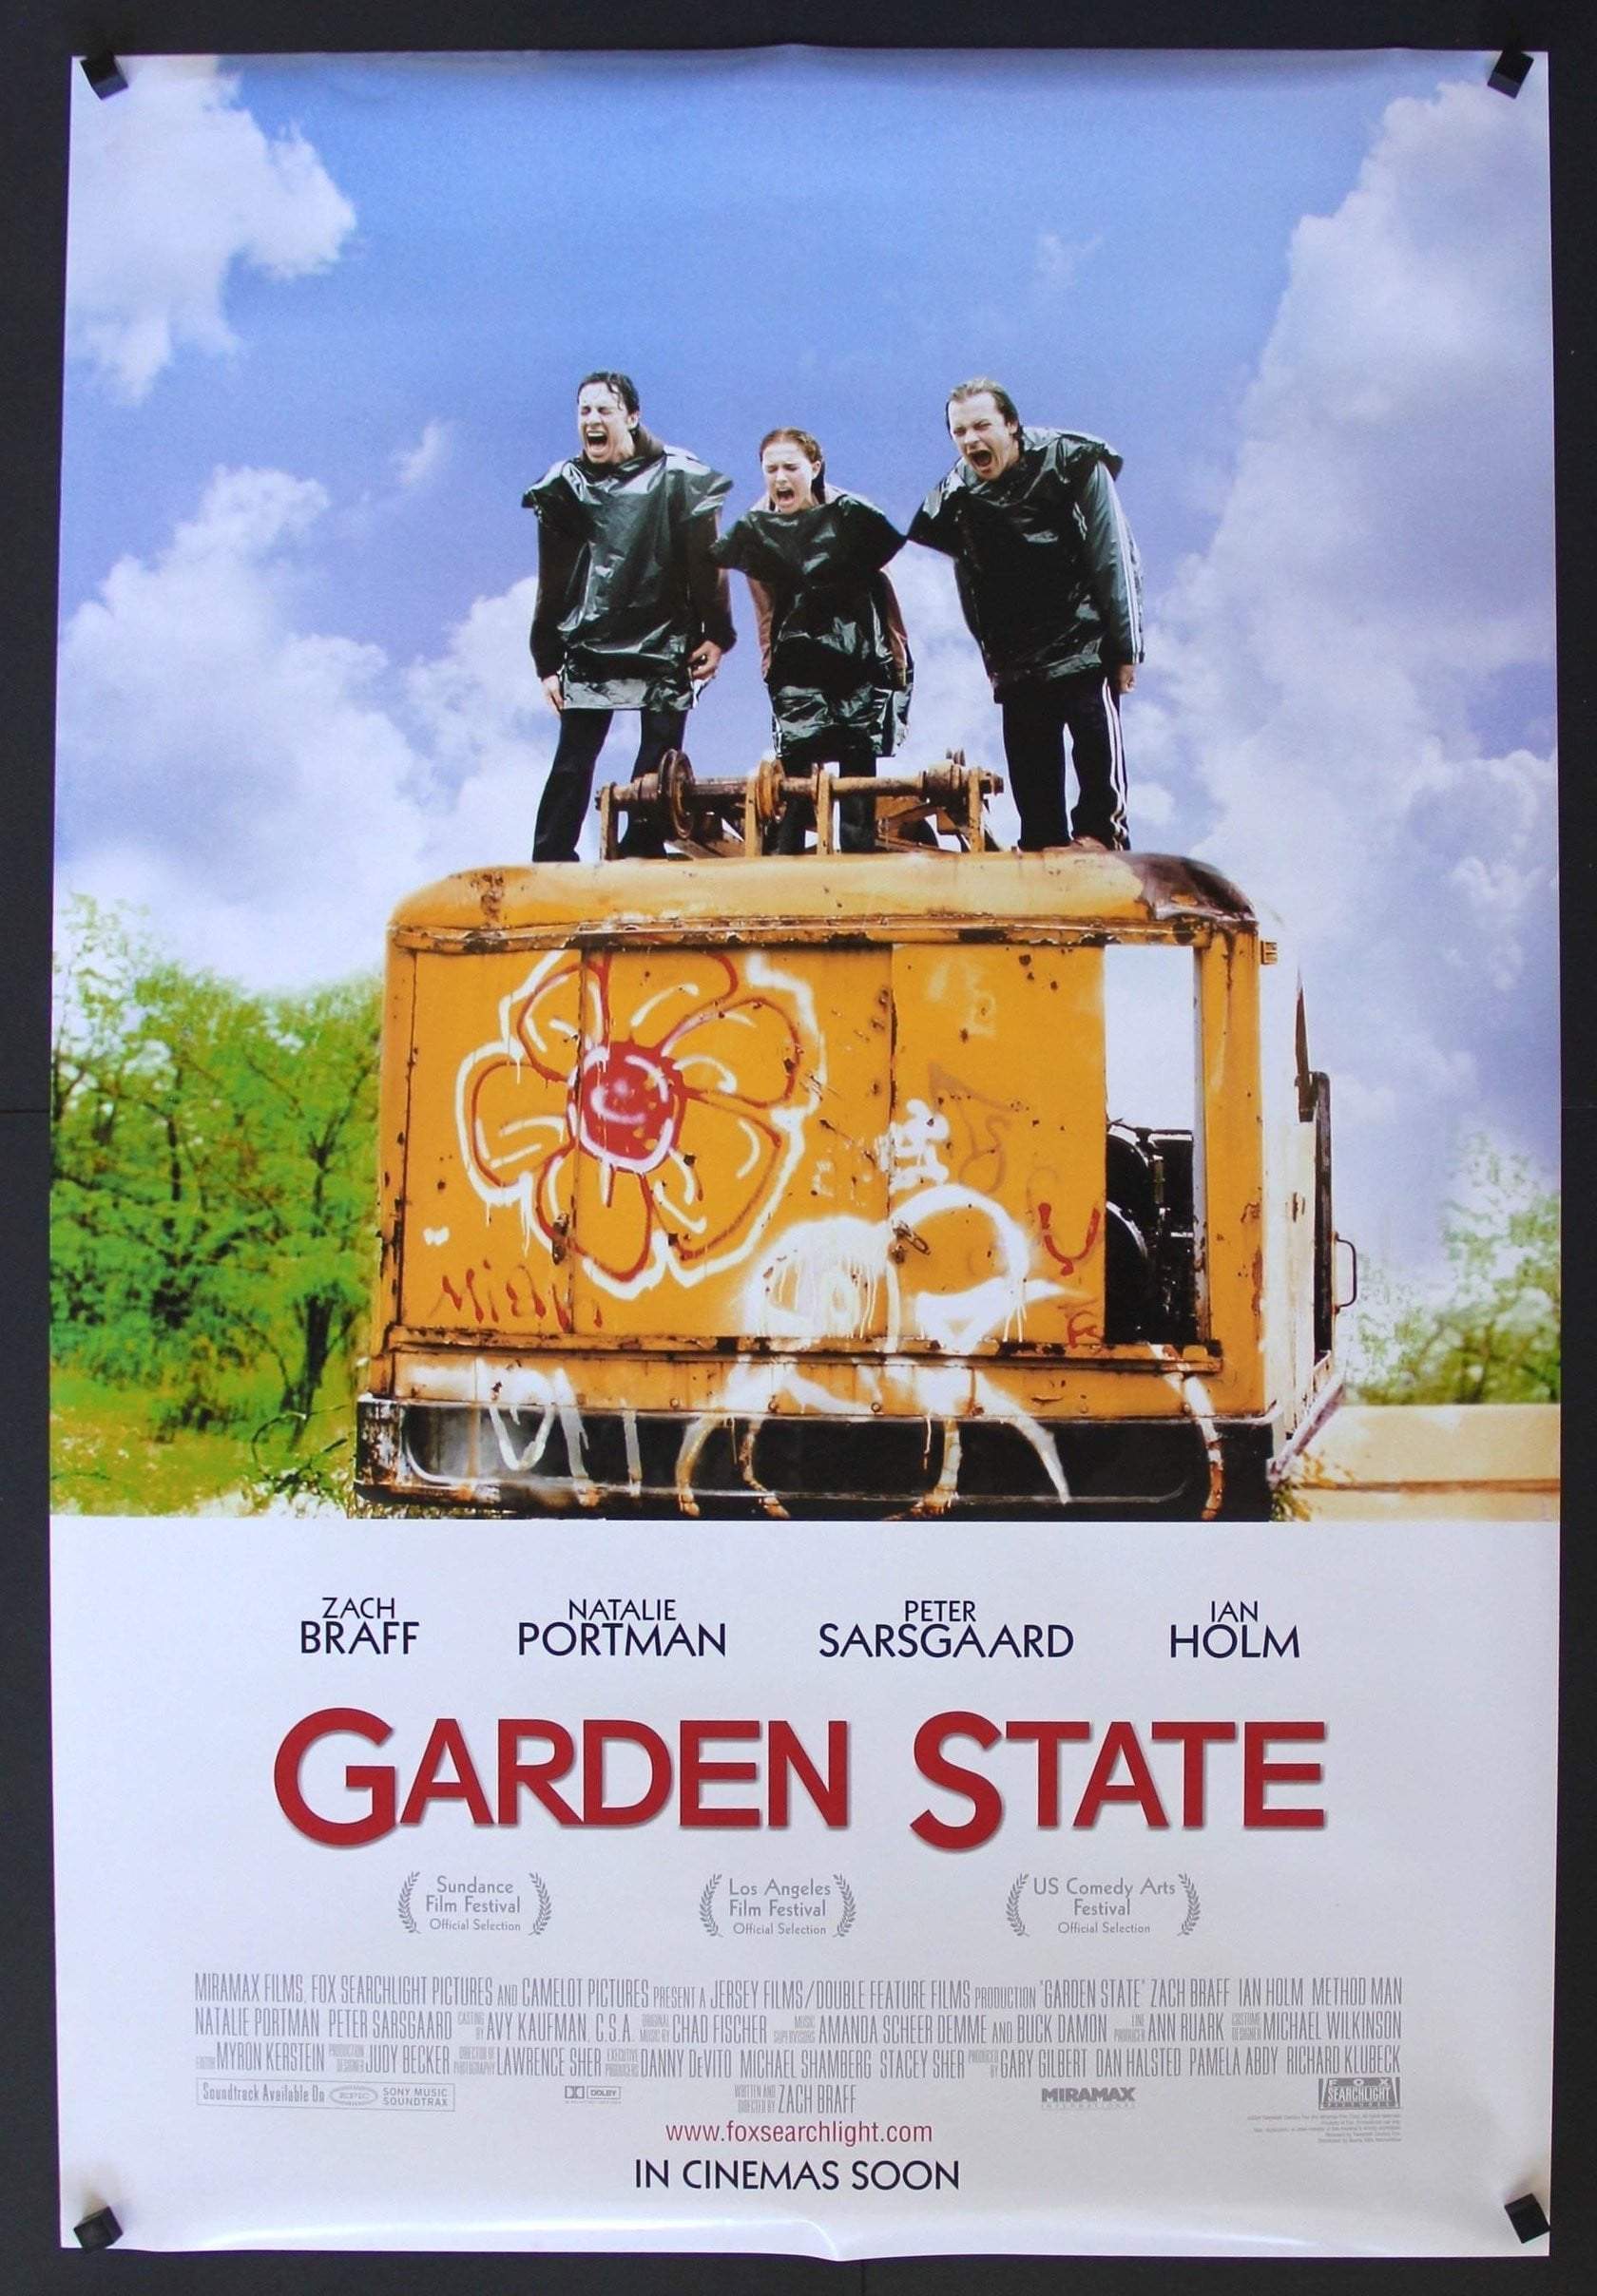 Garden State (2004) Standing In The Rain Listening To The Shins